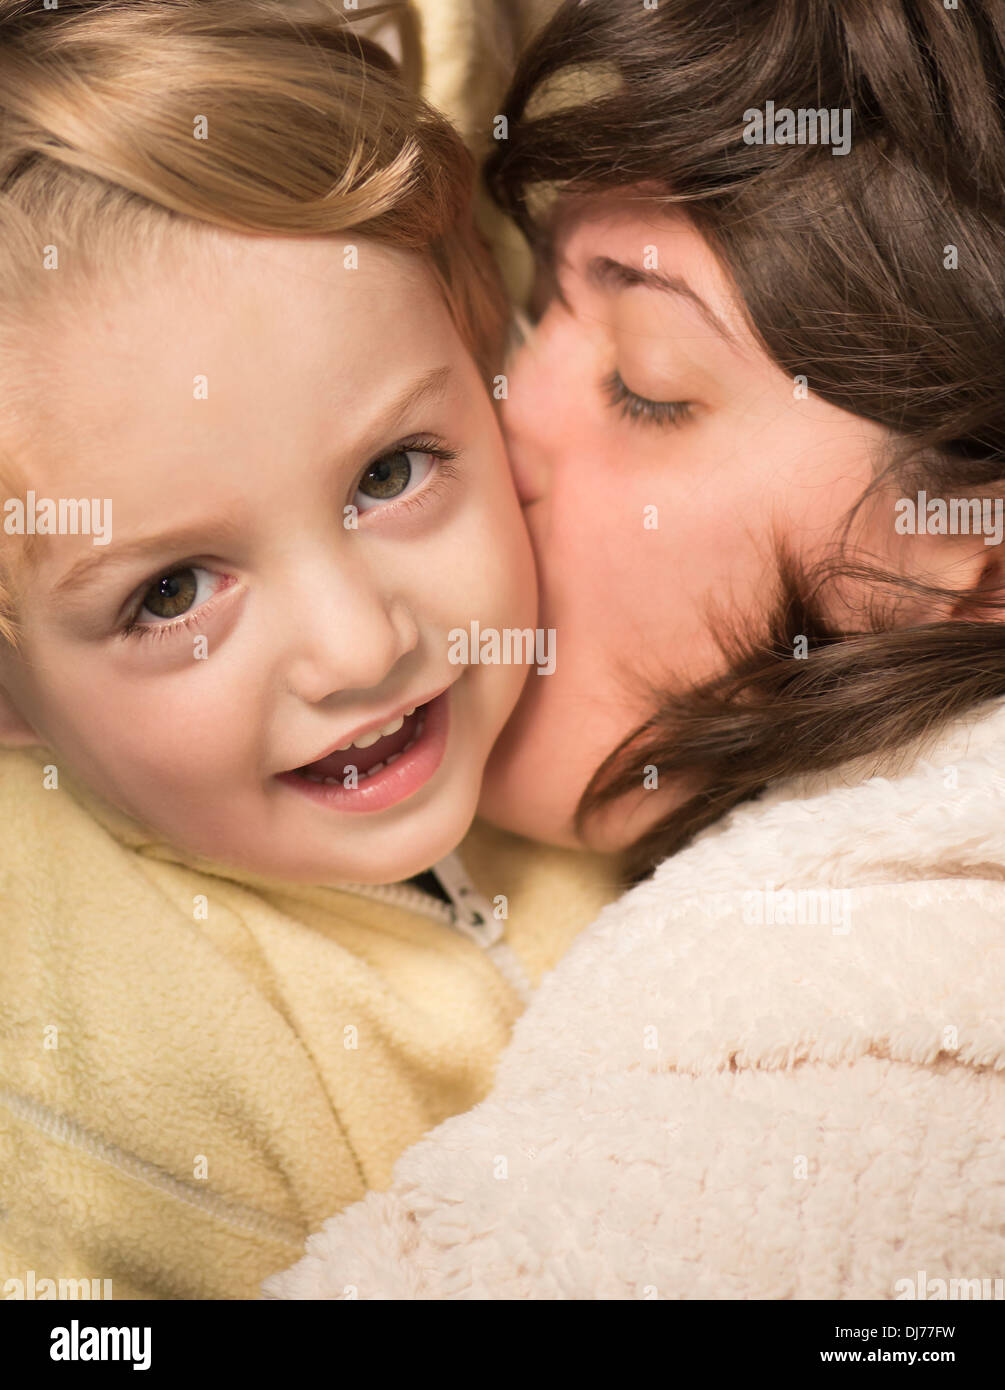 A young mother kissing her little baby Stock Photo